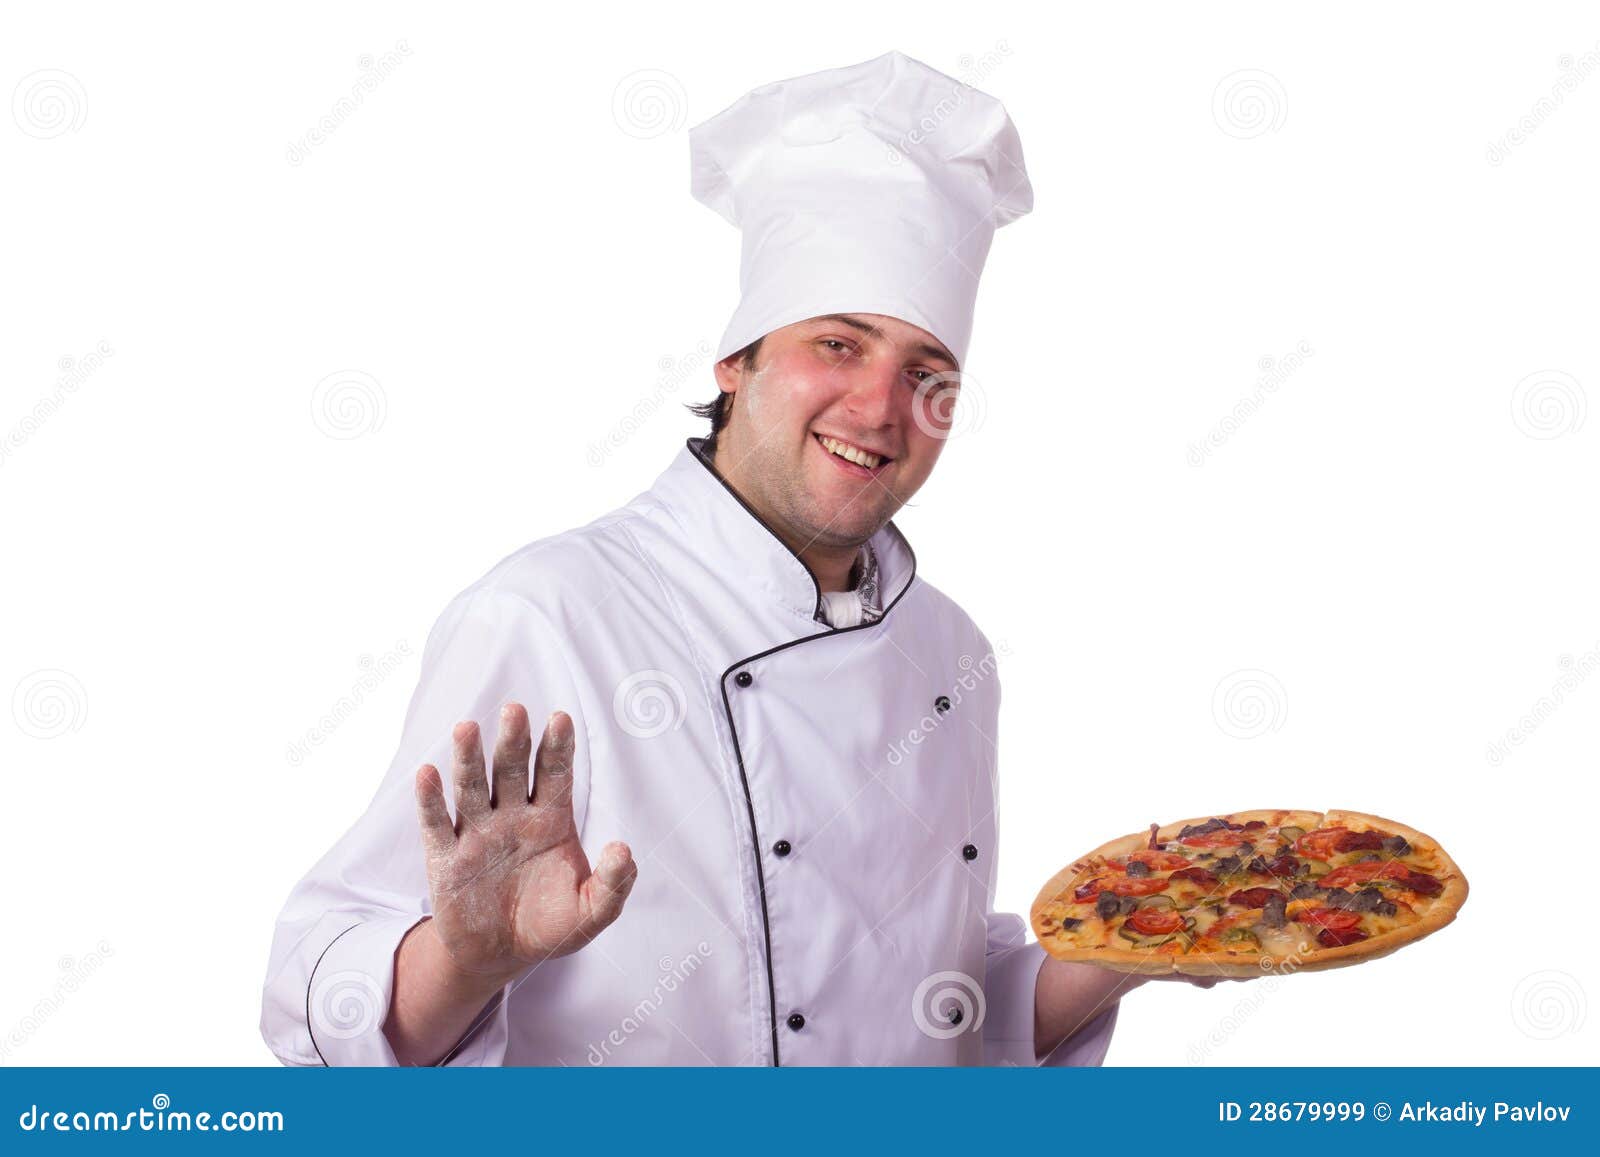 Male Chef Holding a Pizza Box Stock Image - Image of cook, chef: 28679999